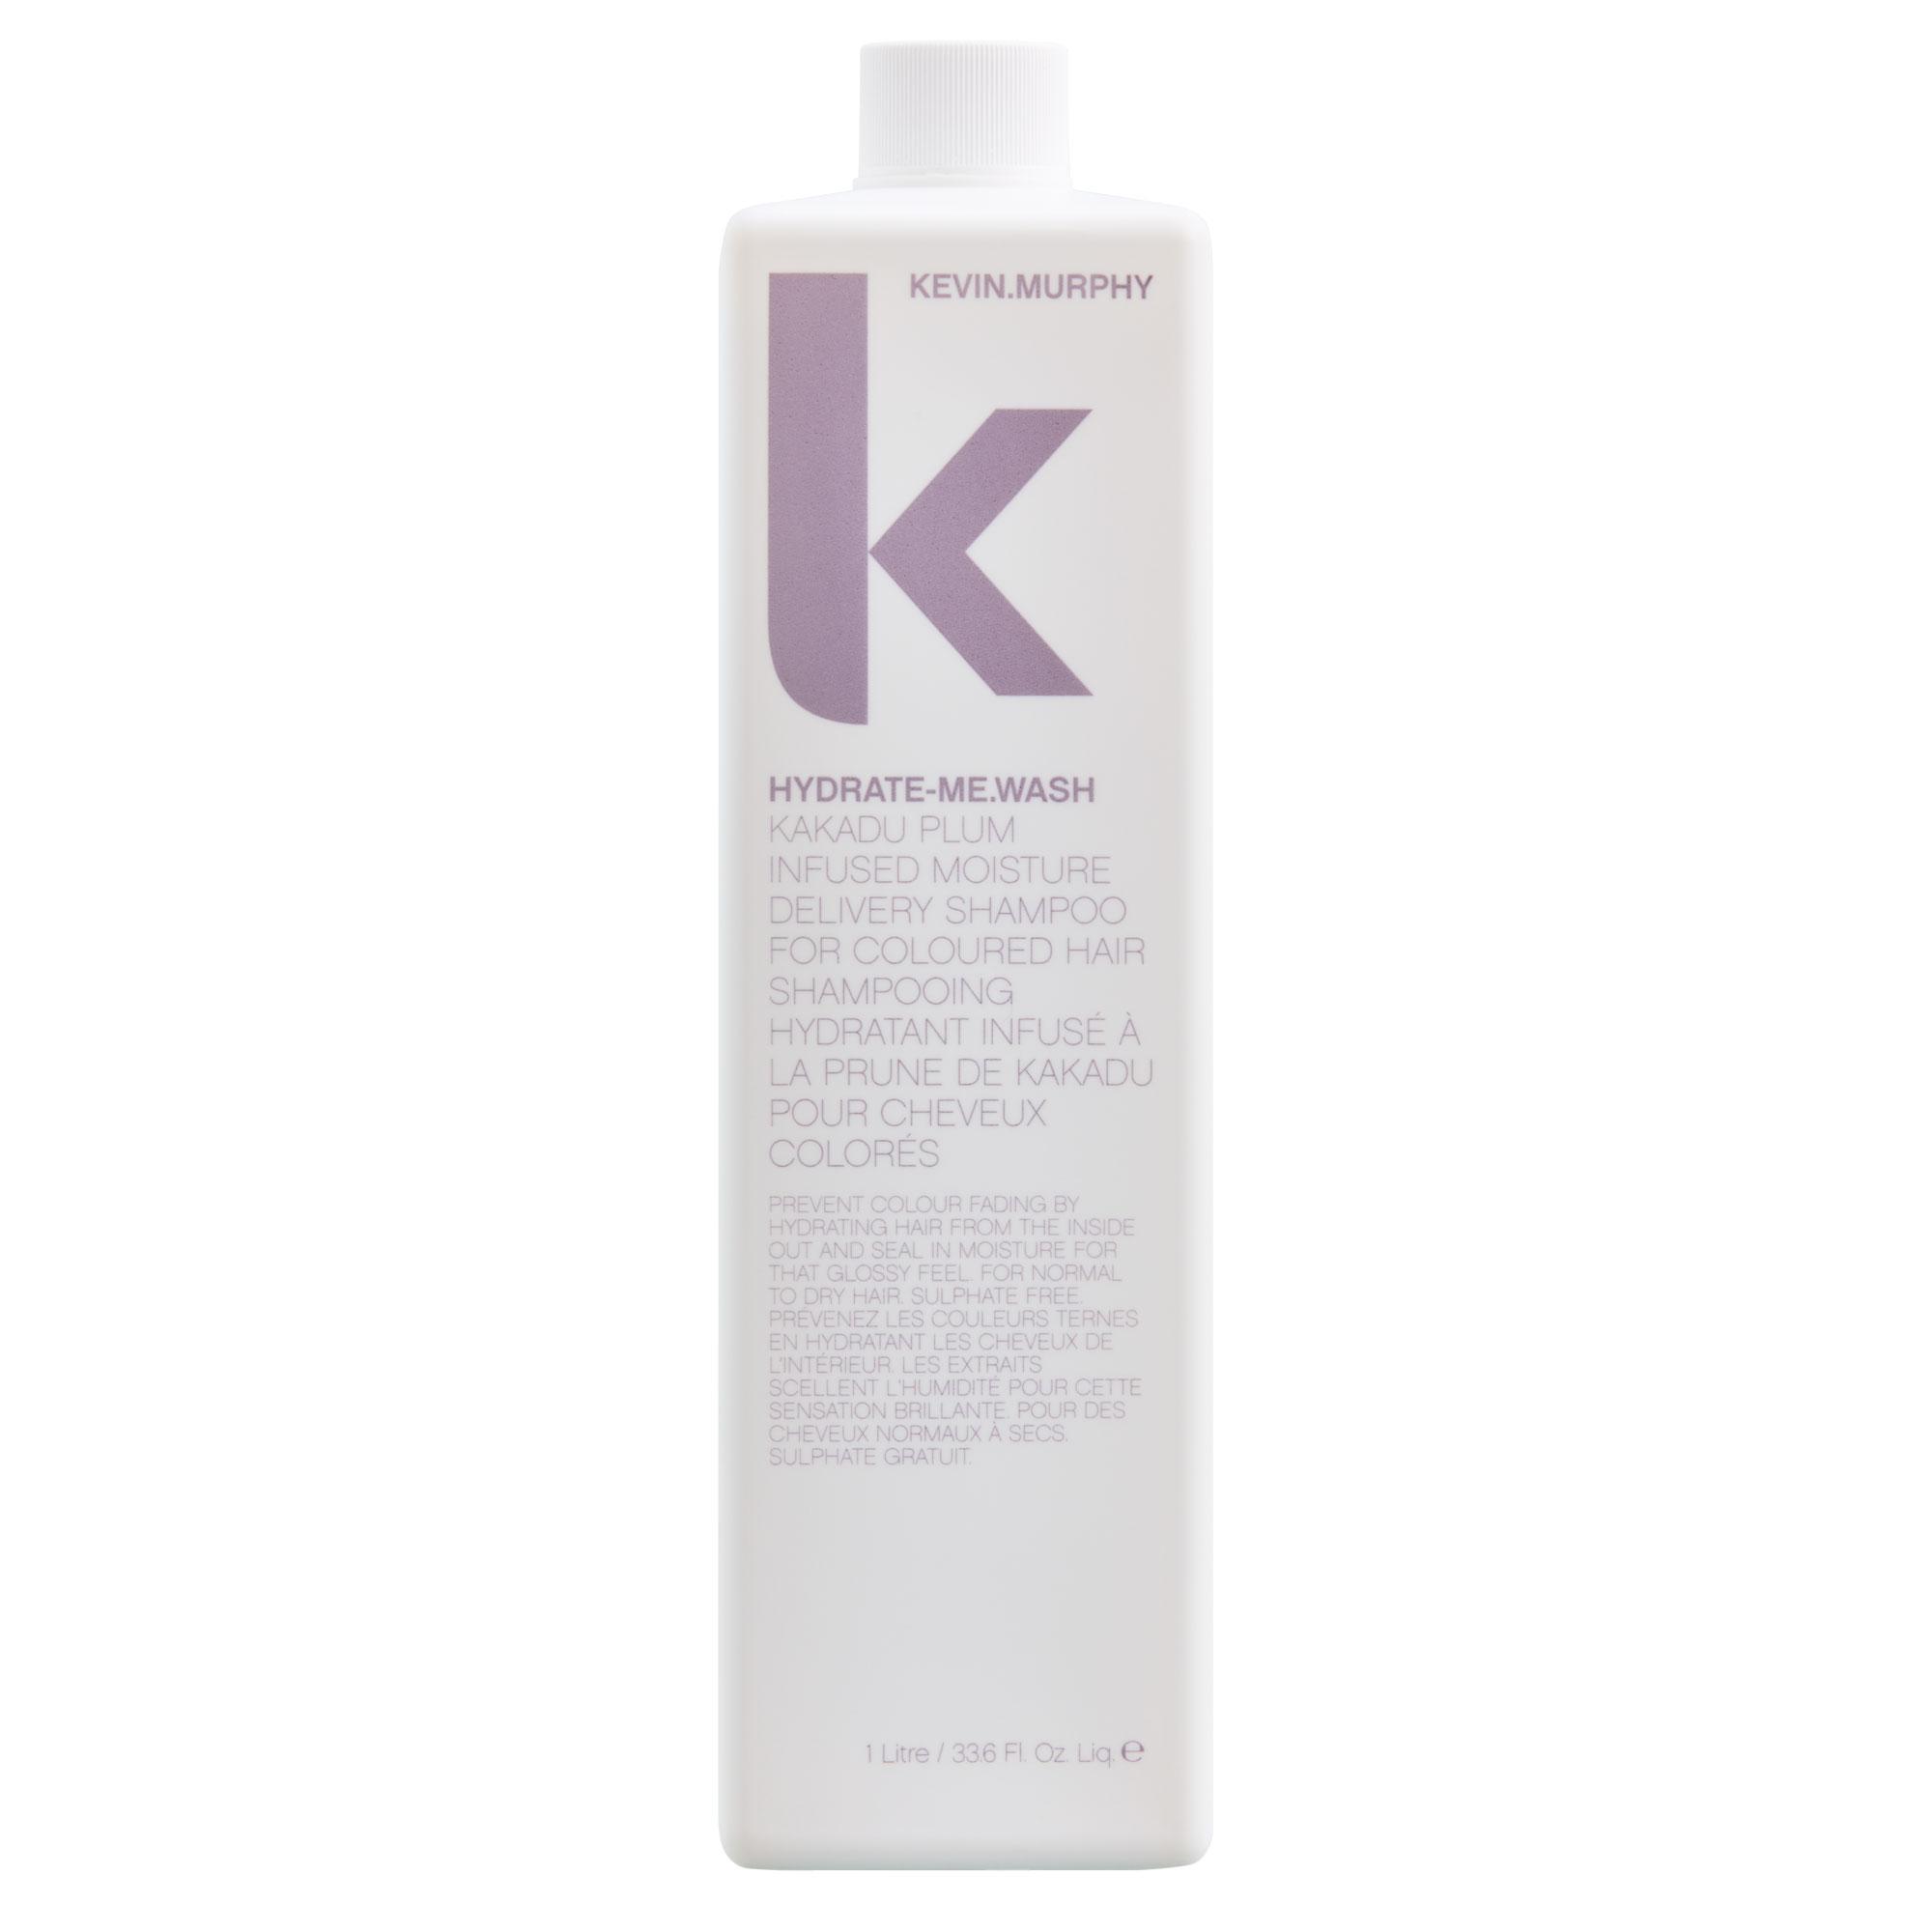 KEVIN.MURPHY HYDRATE-ME.WASH 1liter